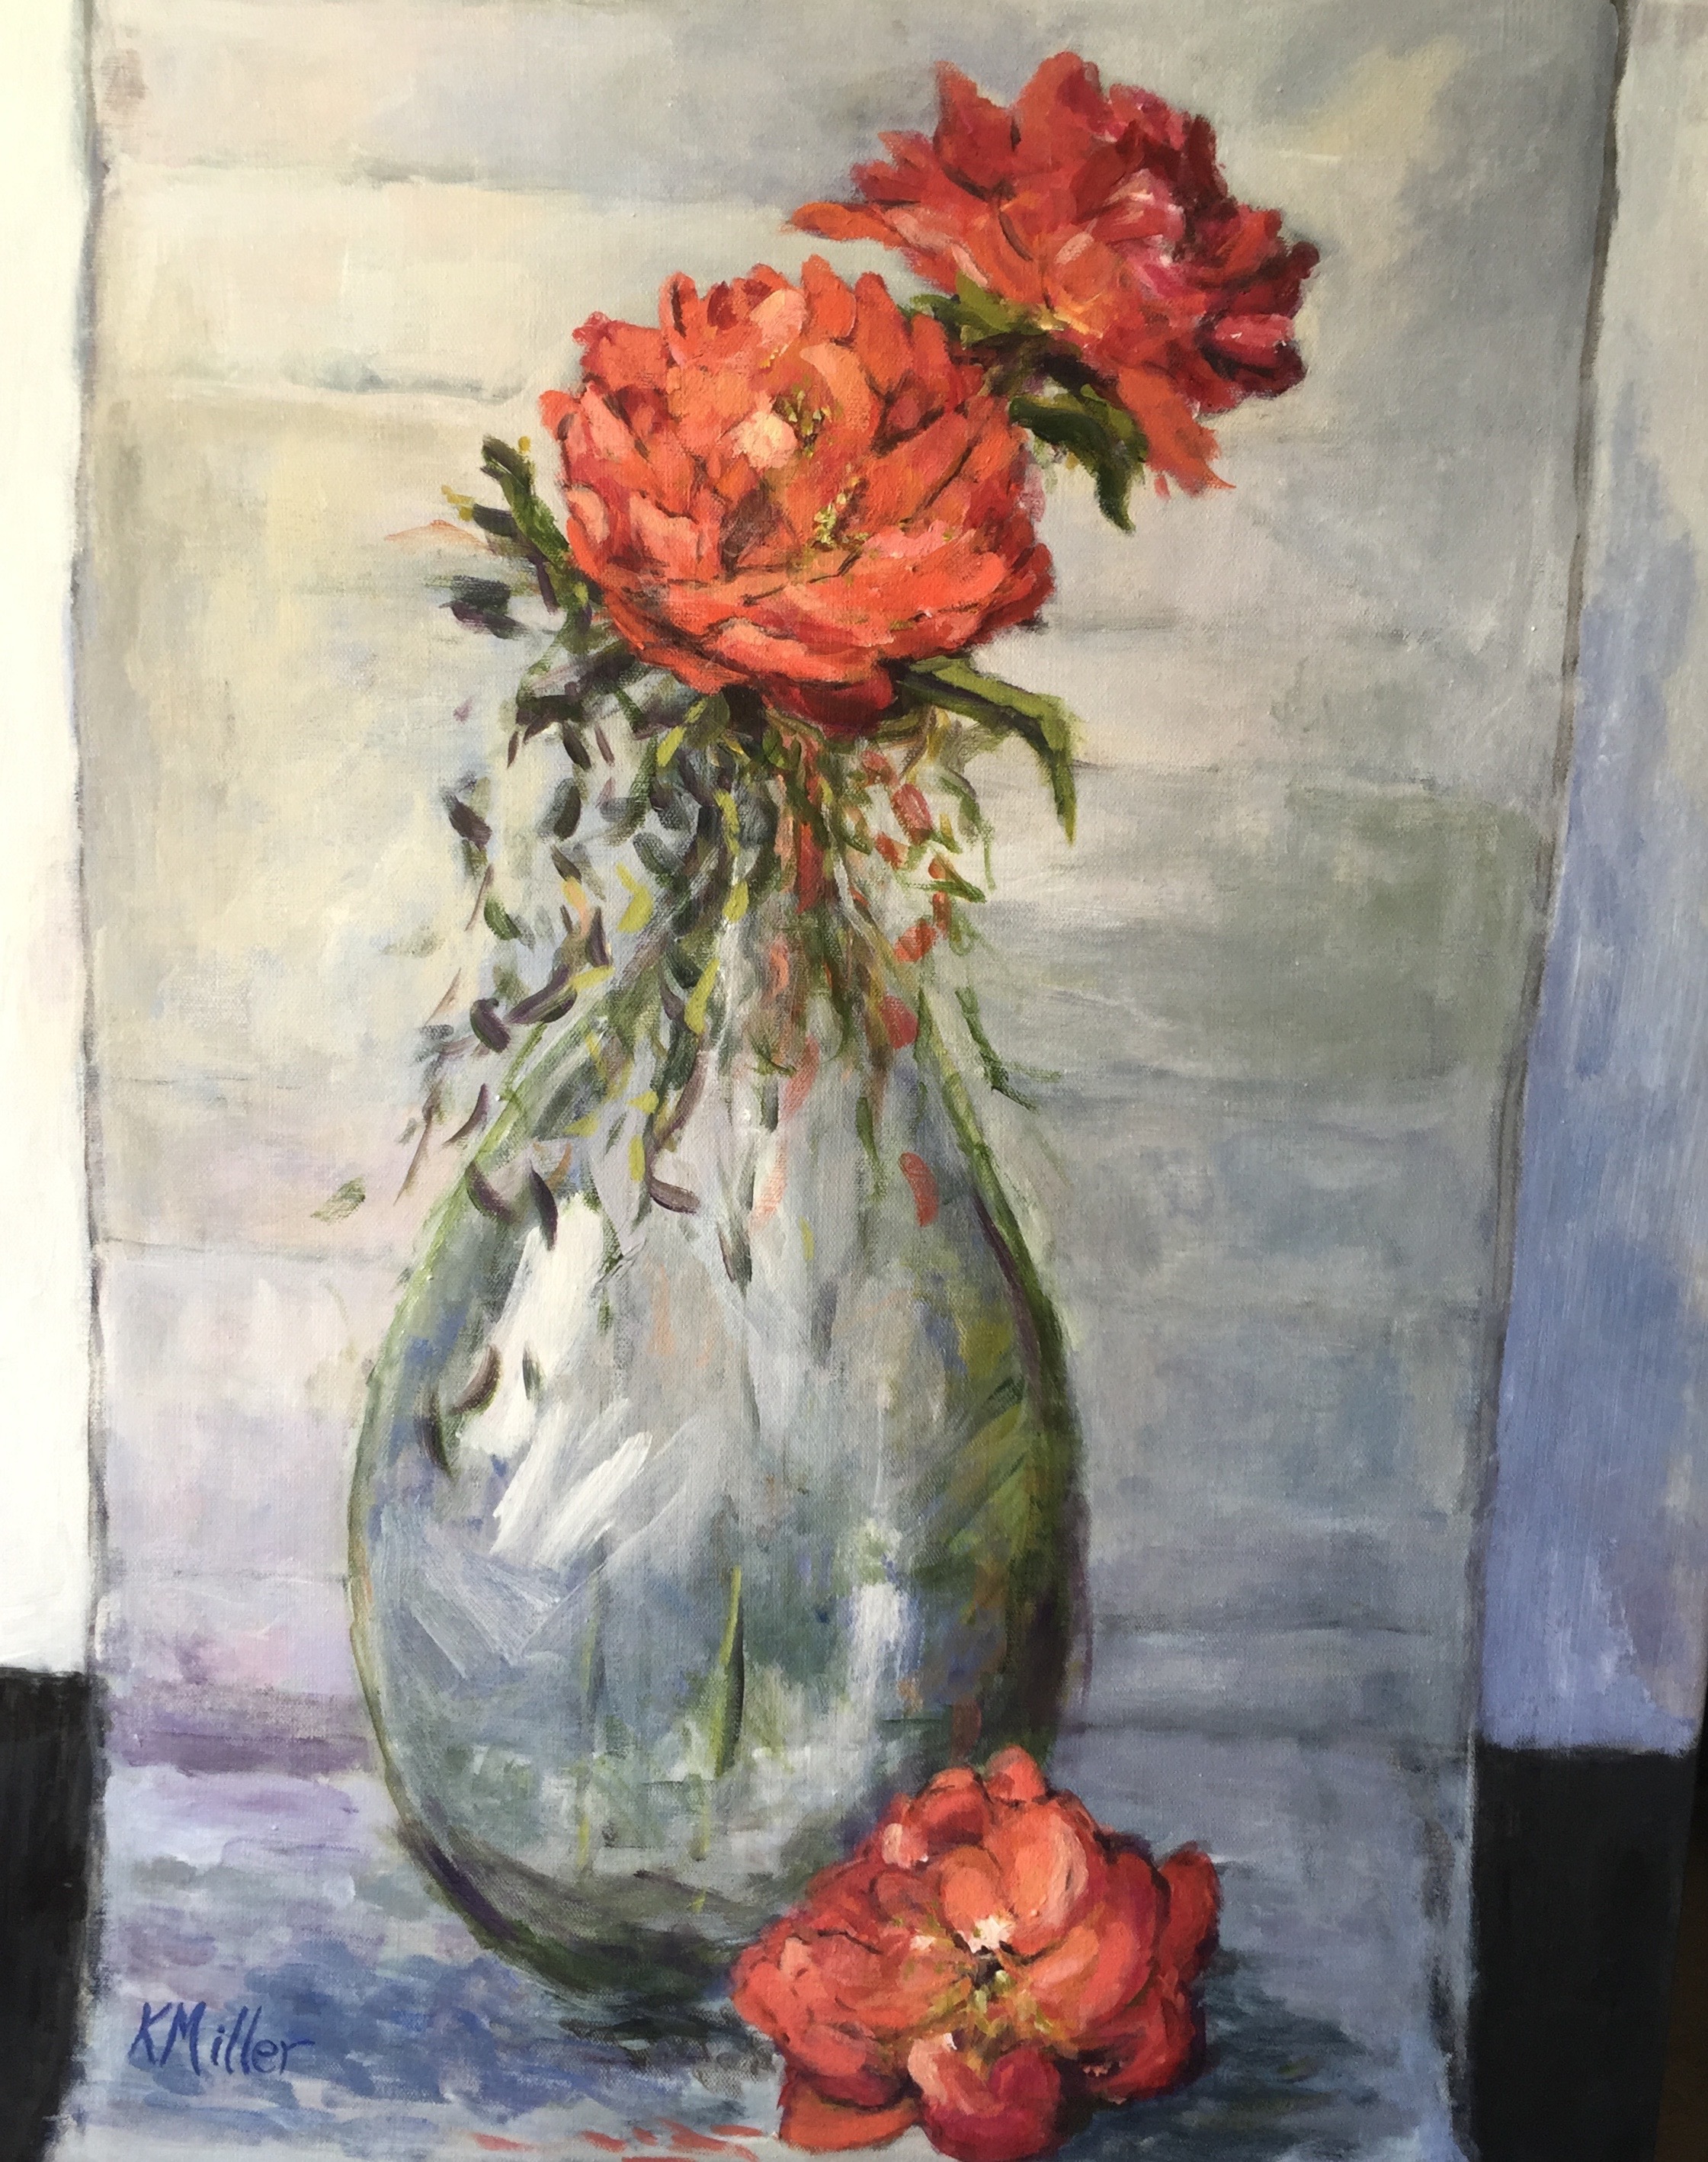 Flamingo Peonies In A Bottle painting by Kathy Miller